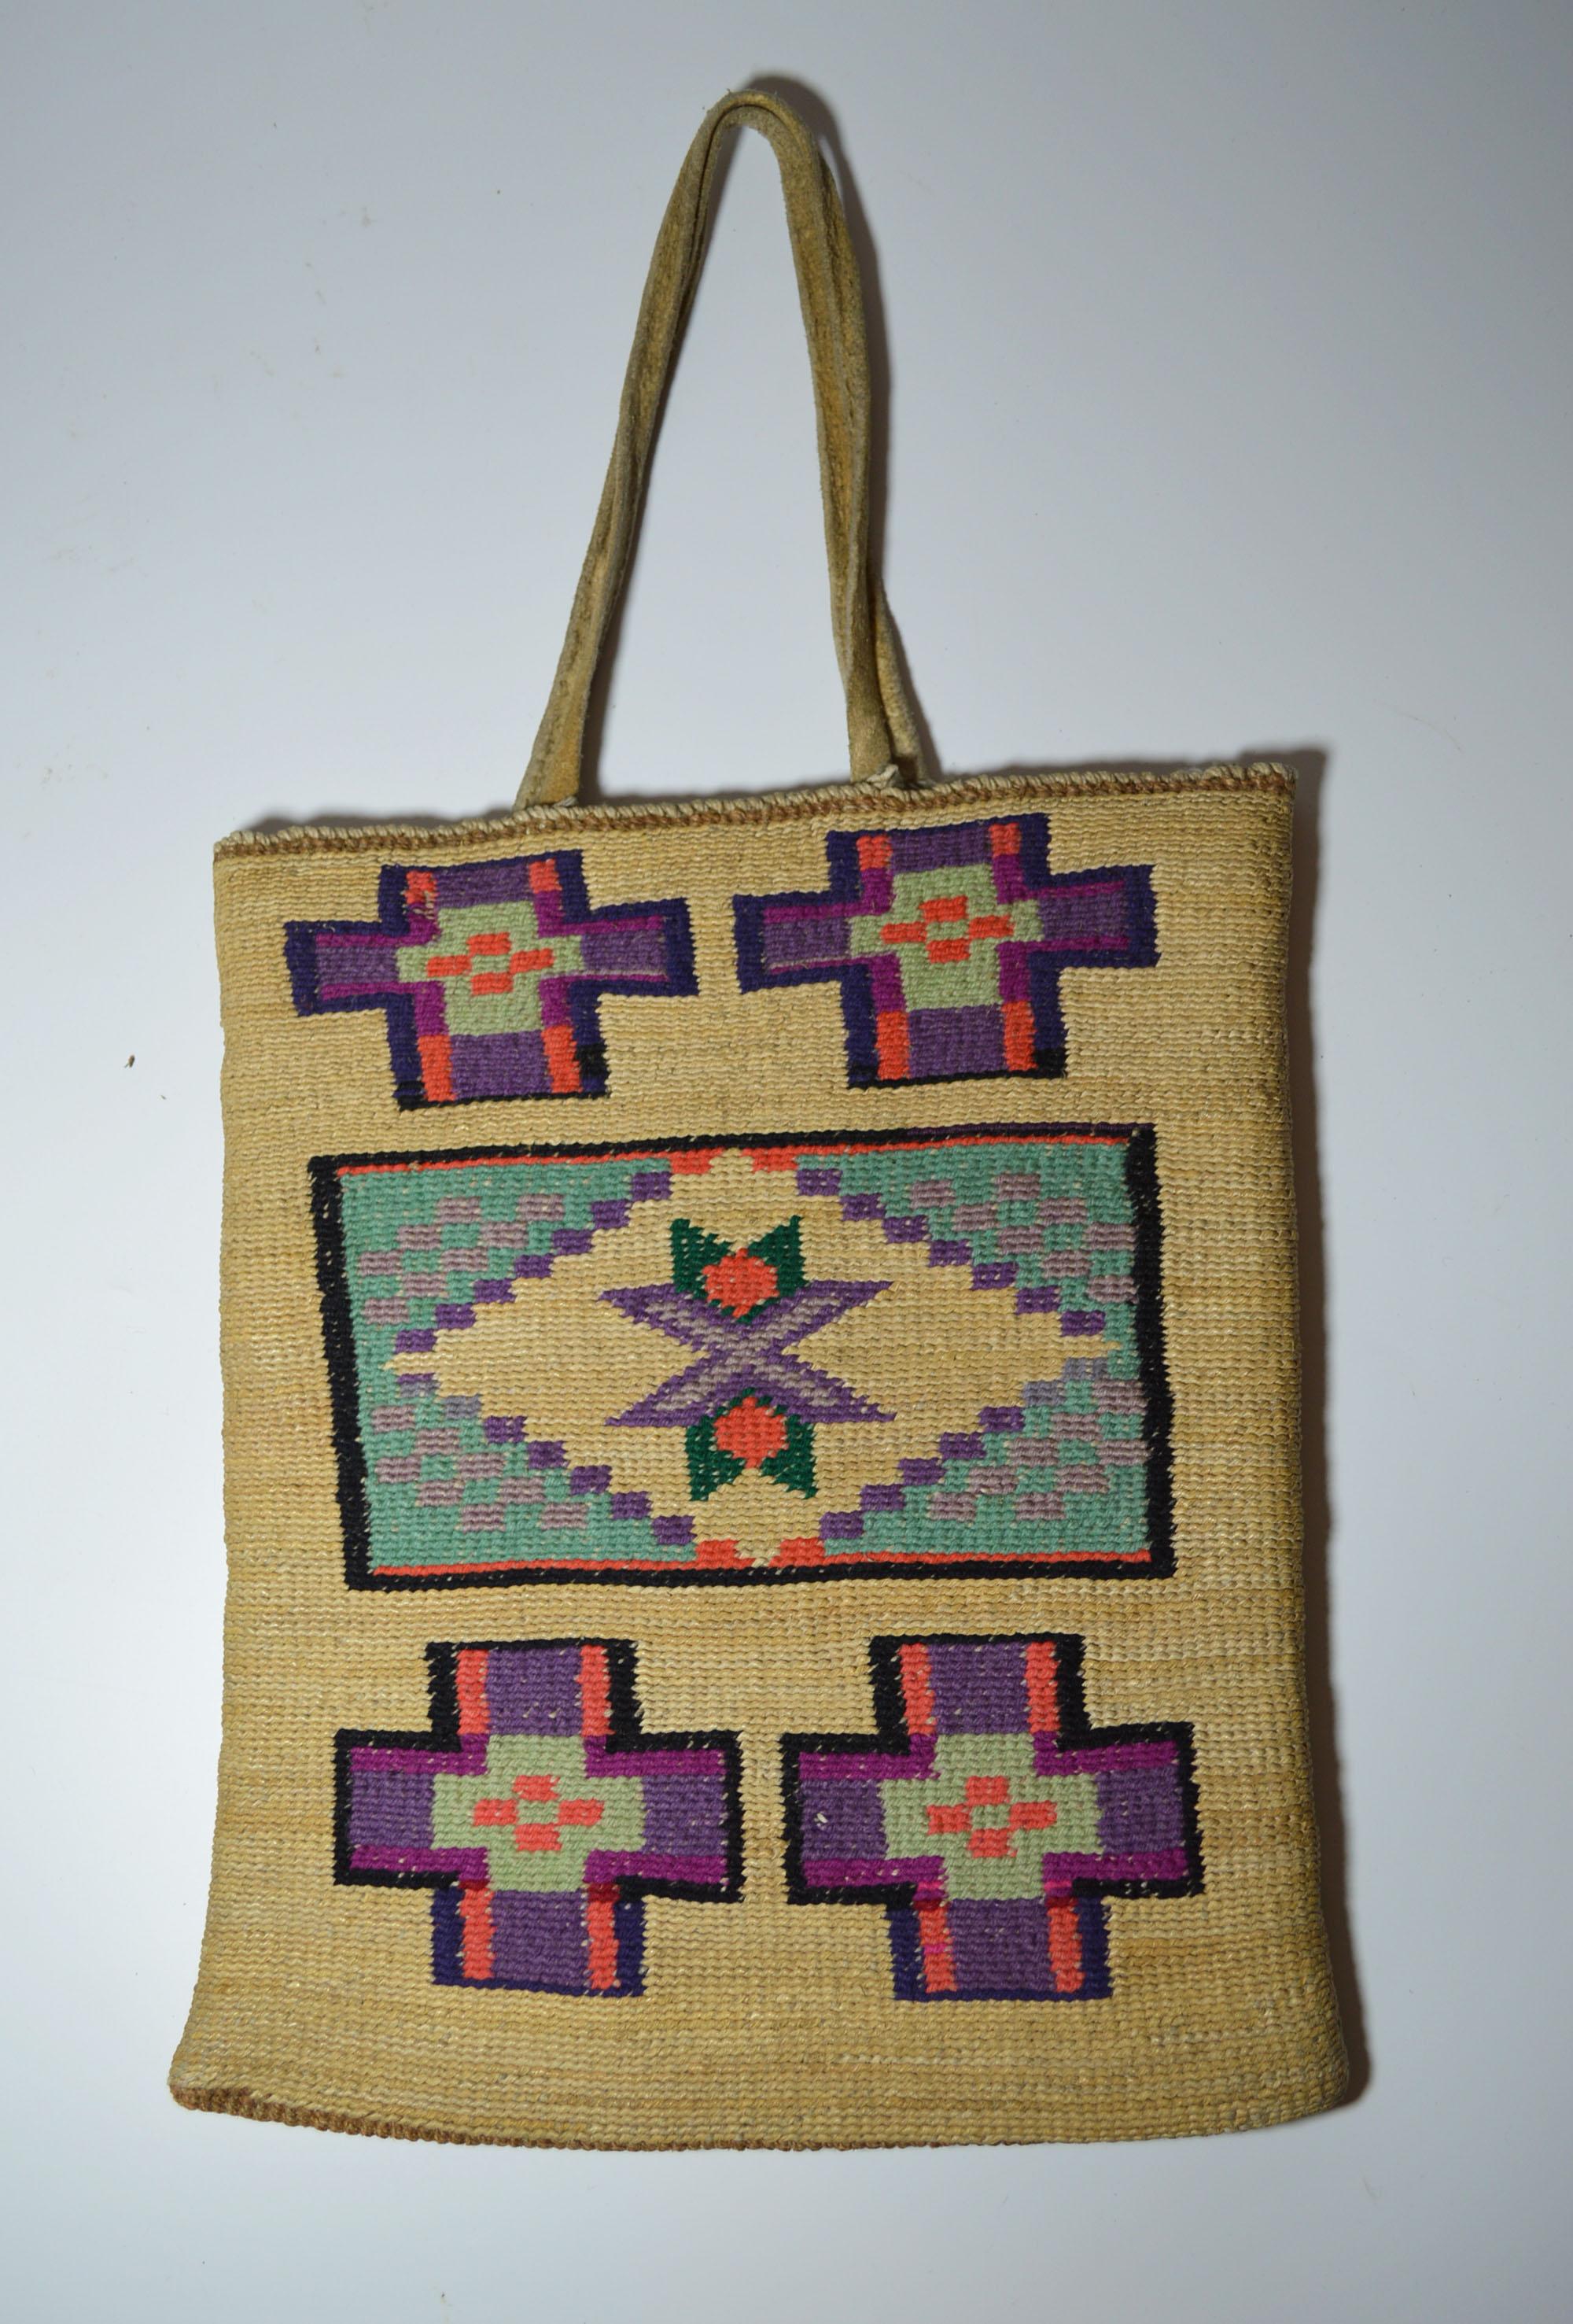 A fine Old Native American Indian plateau corn husk bag
Very finely crafted in corn fiber with differing colored geometric designs
with Buckskin handles
Period circa 1900
Size 29 x 23.5 cm
Condition : Fine
Ex UK collection.  Ex cook Gallery Denver
 